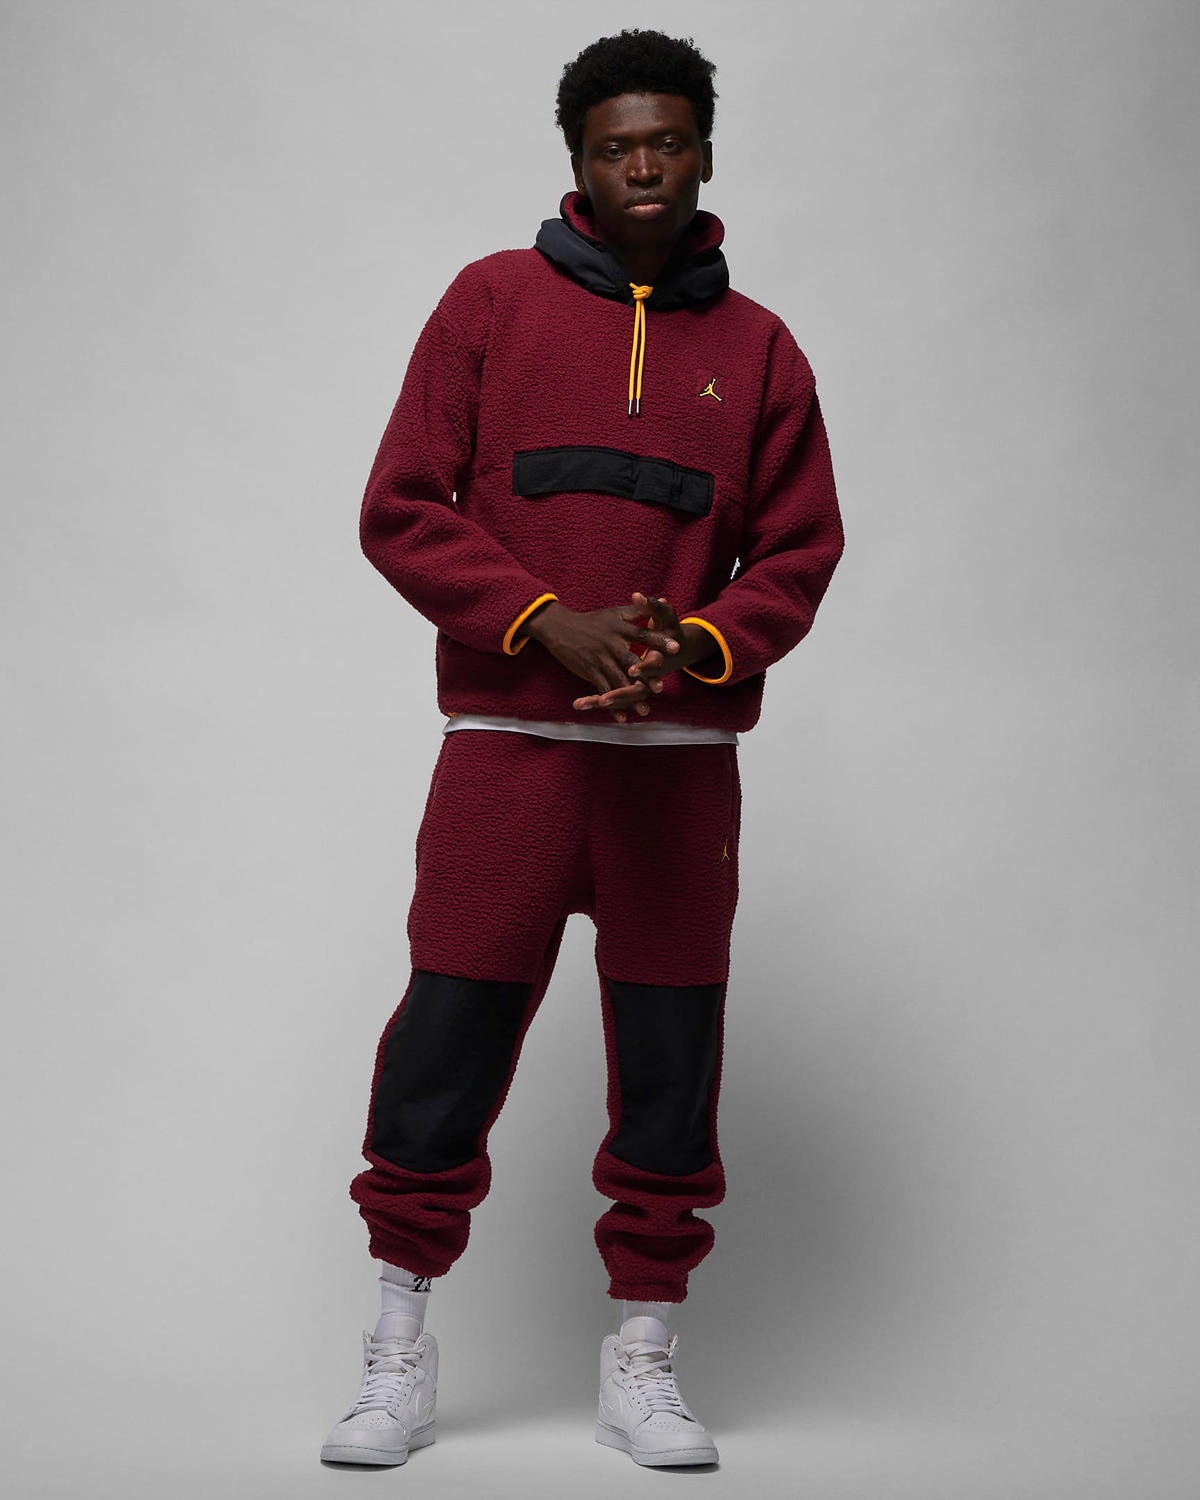 Jordan Cherrywood Red Shirts Clothing Sneaker Outfits